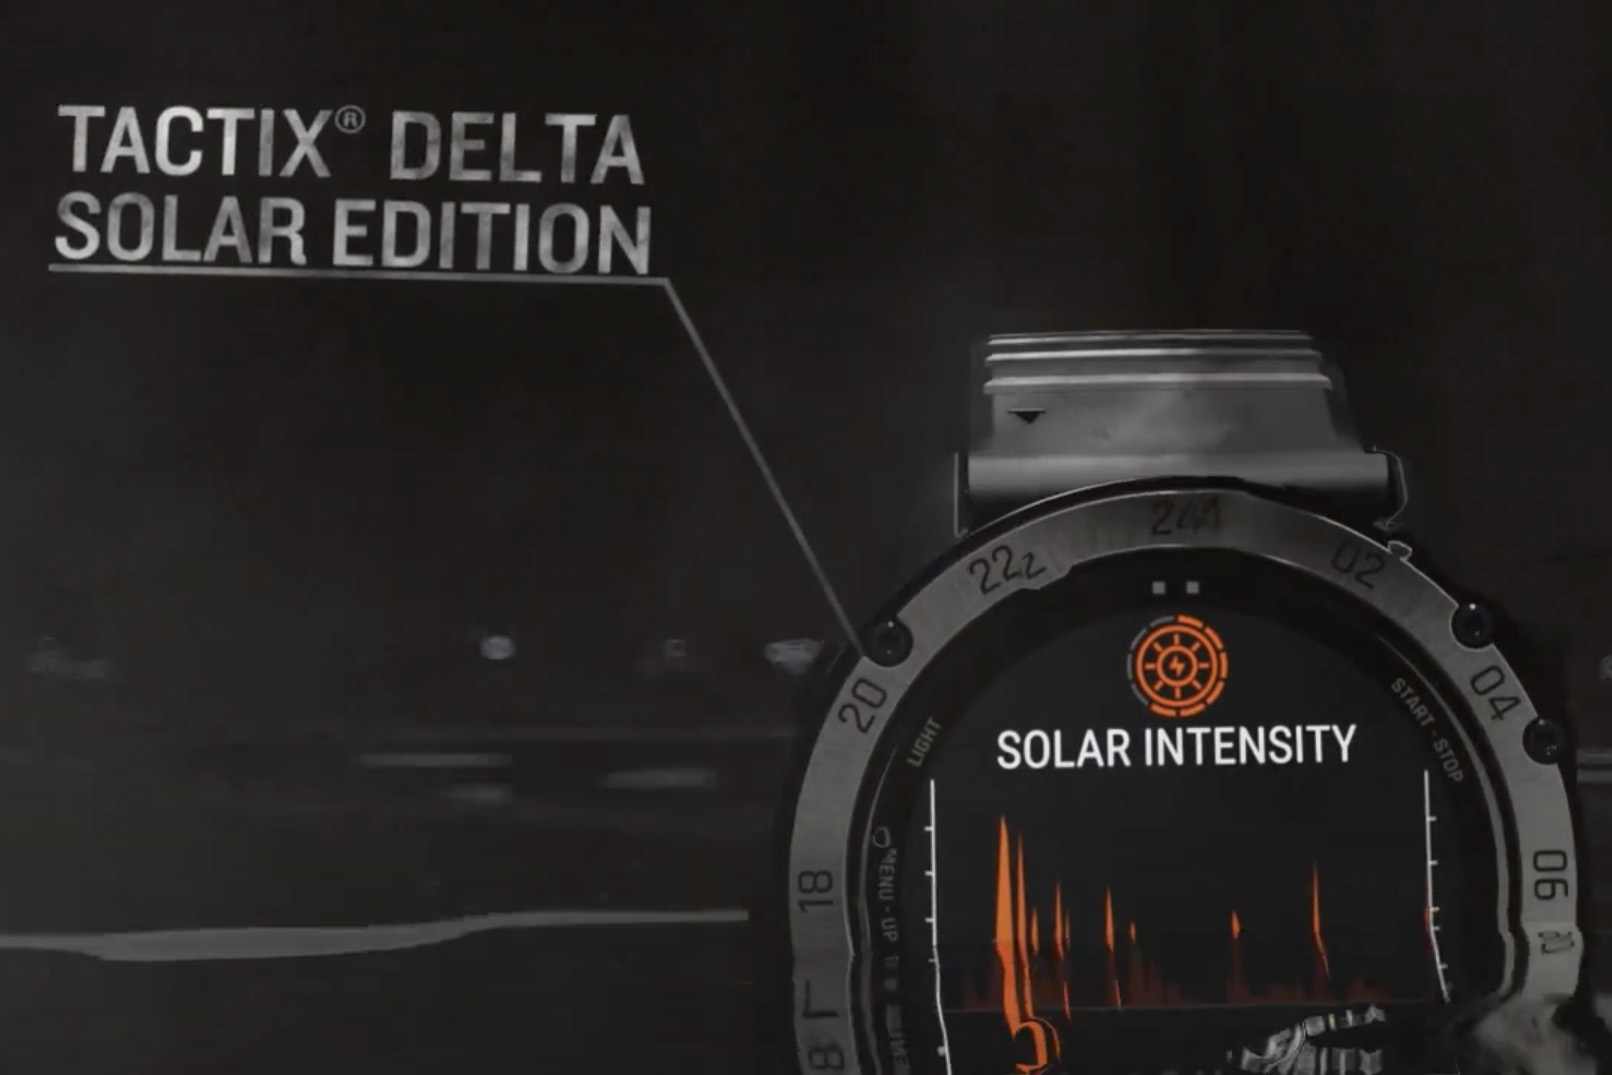 Garmin Adds Solar Charging to Its Tactical Smartwatches